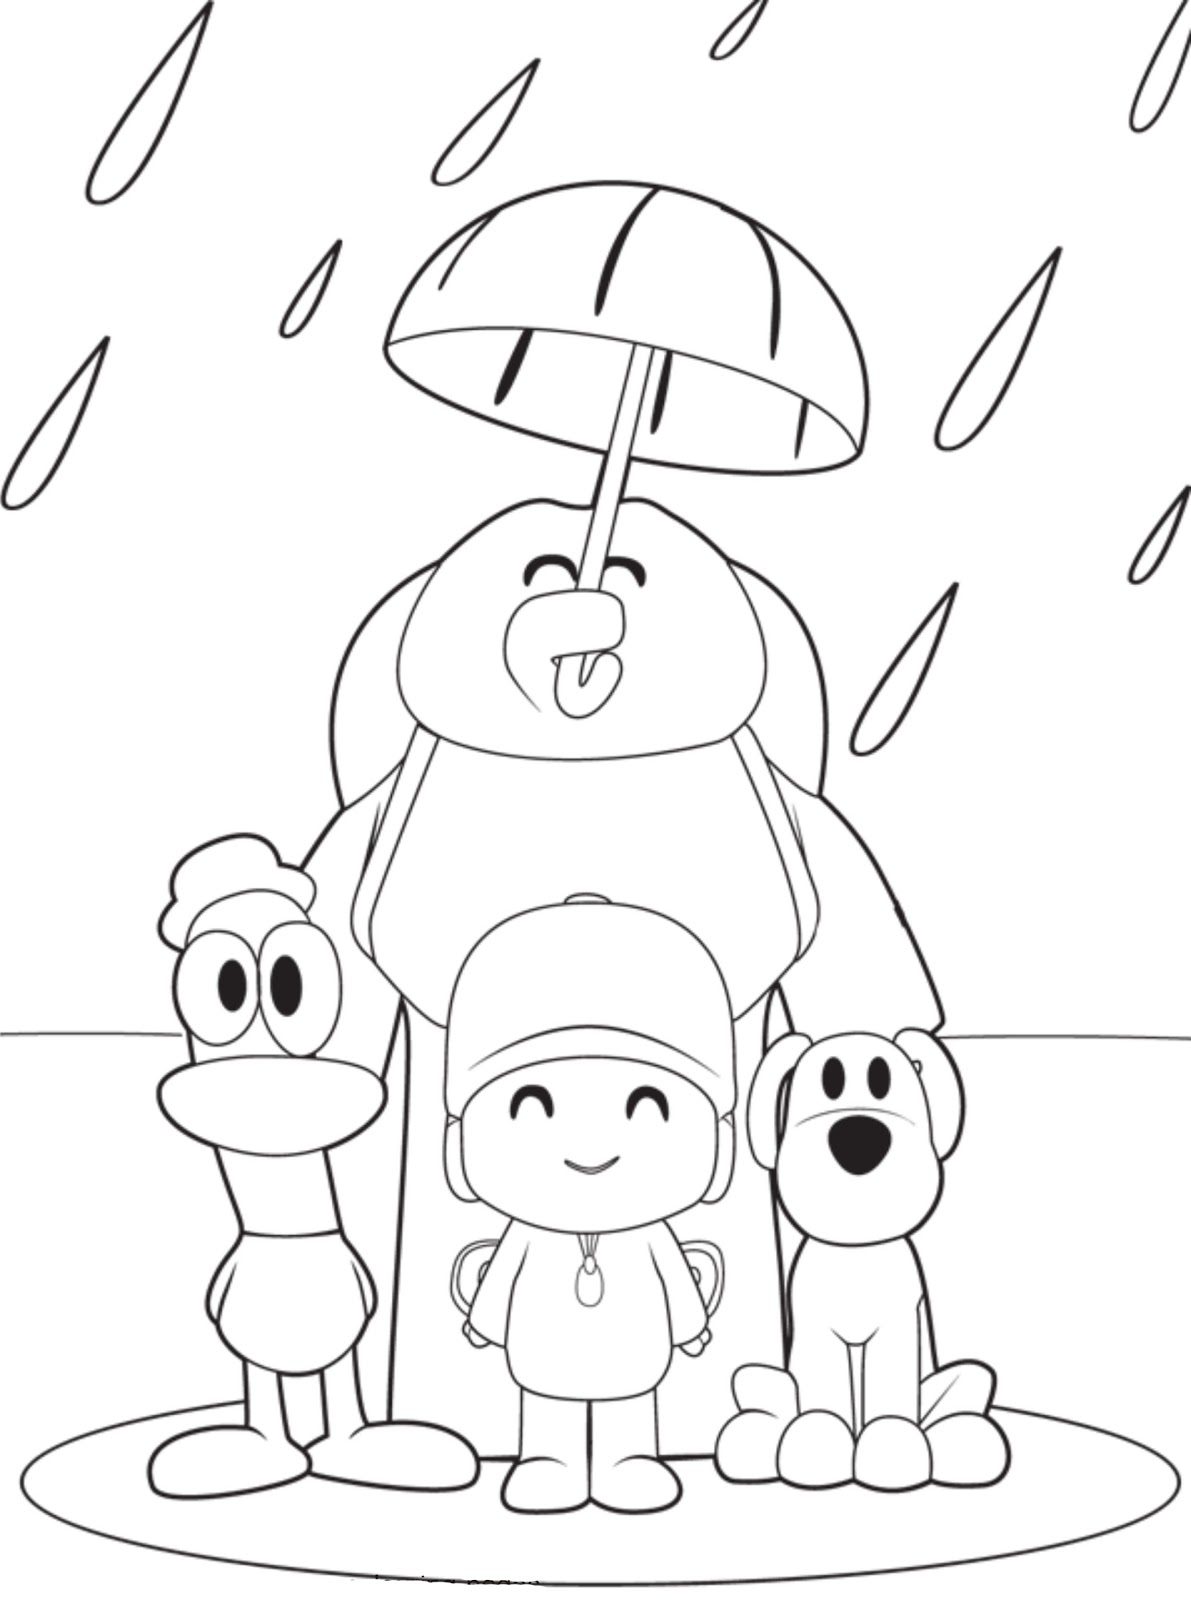 Download Pocoyo Coloring Pages ~ Free Printable Coloring Pages ...